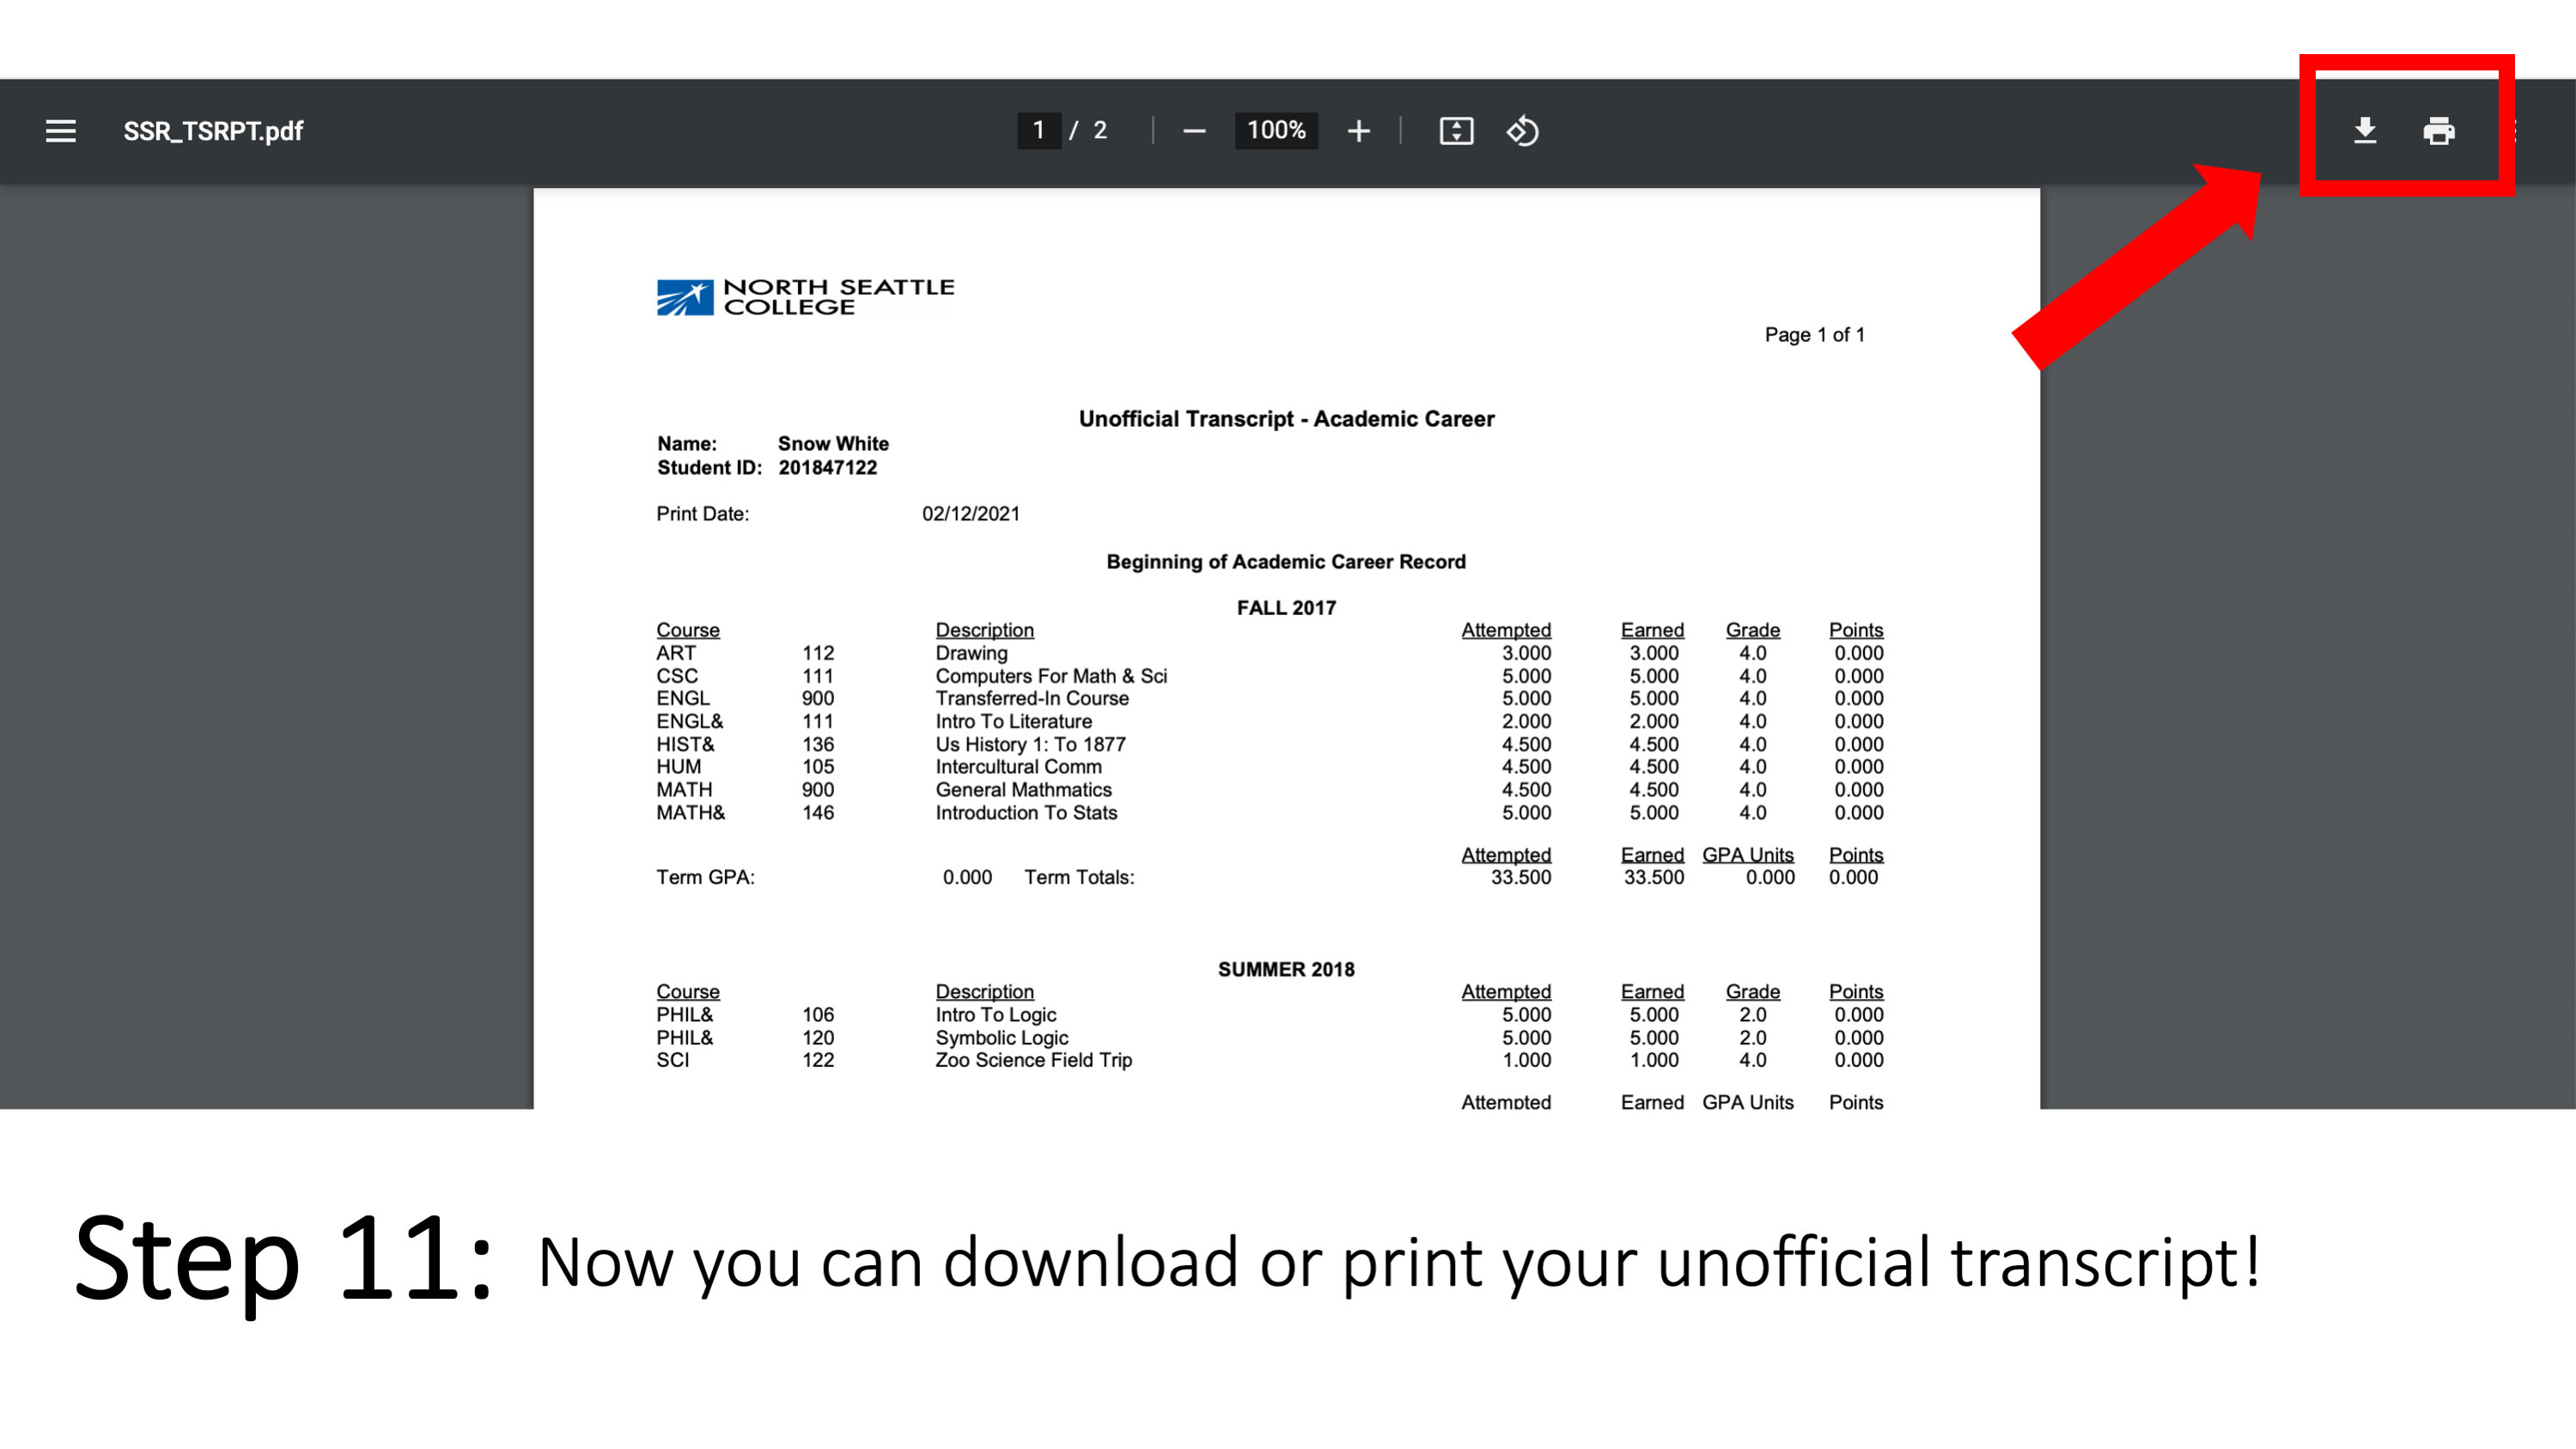 Step 11: Now you can download or print your unofficial transcript! 